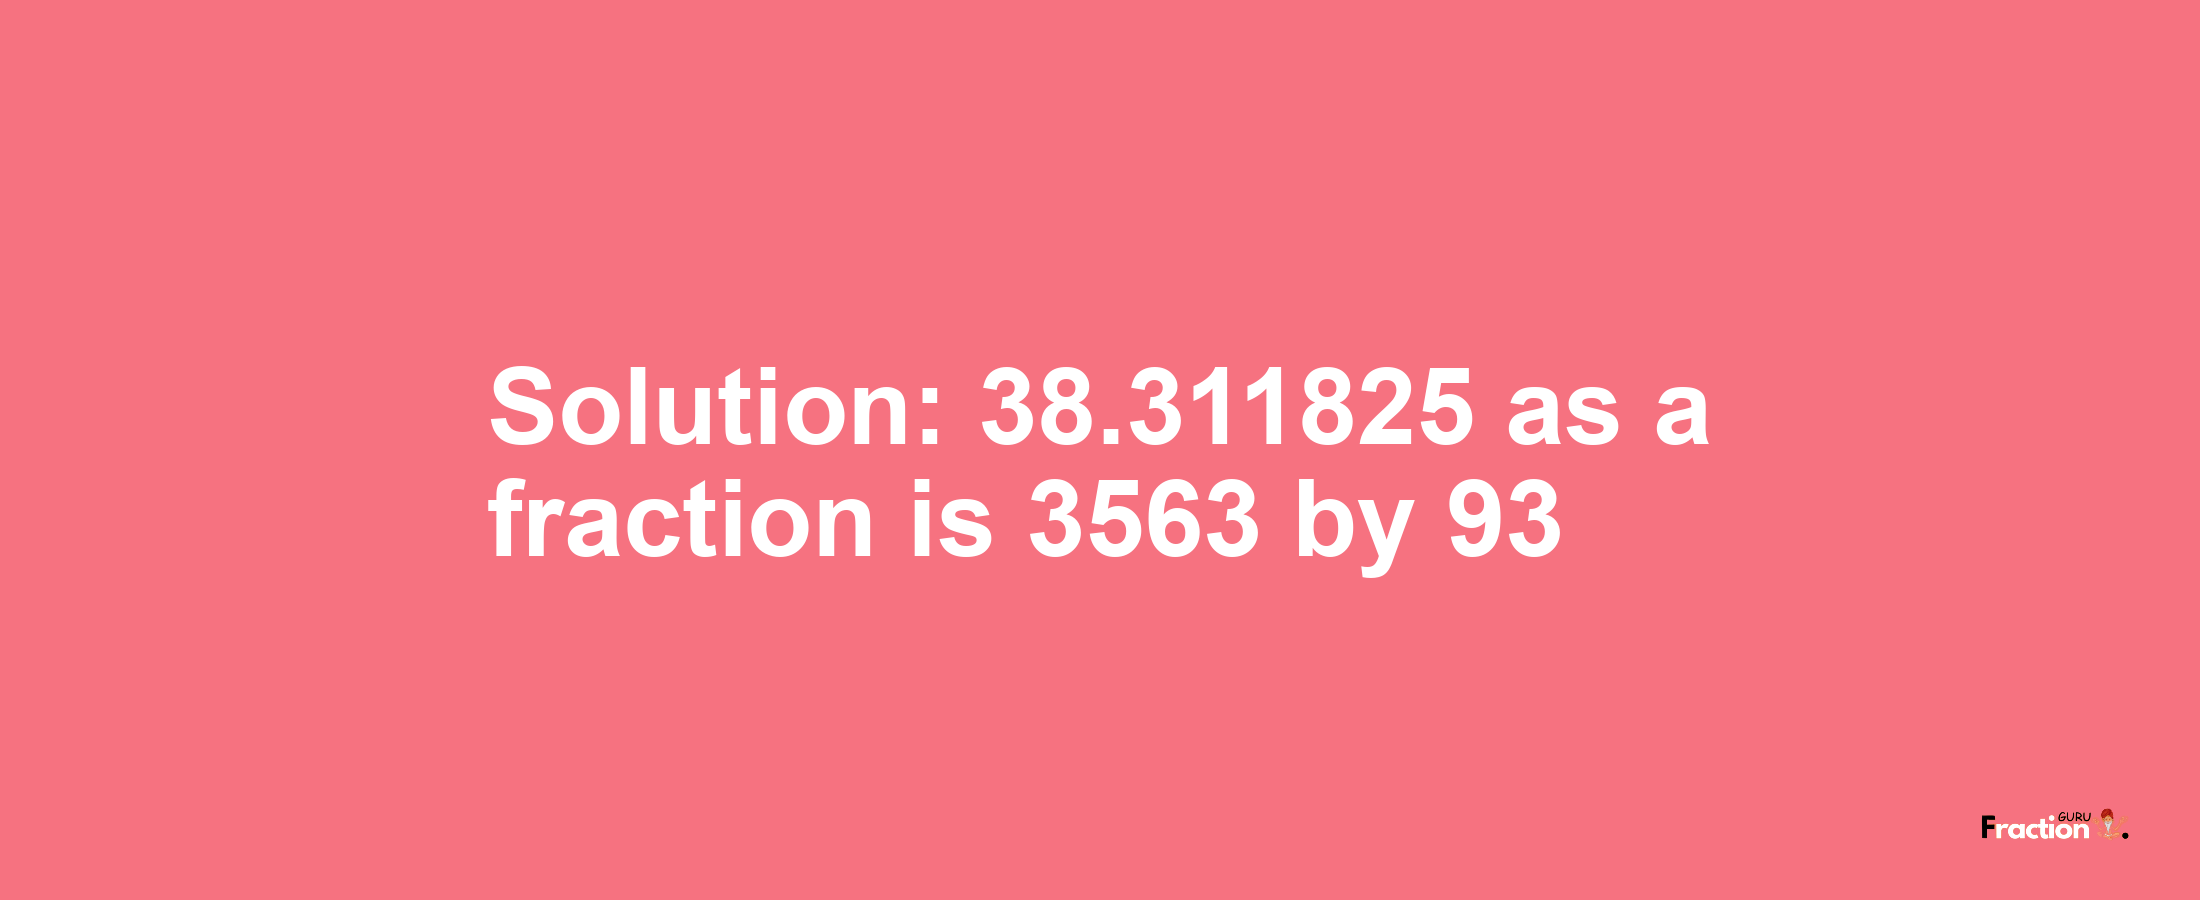 Solution:38.311825 as a fraction is 3563/93